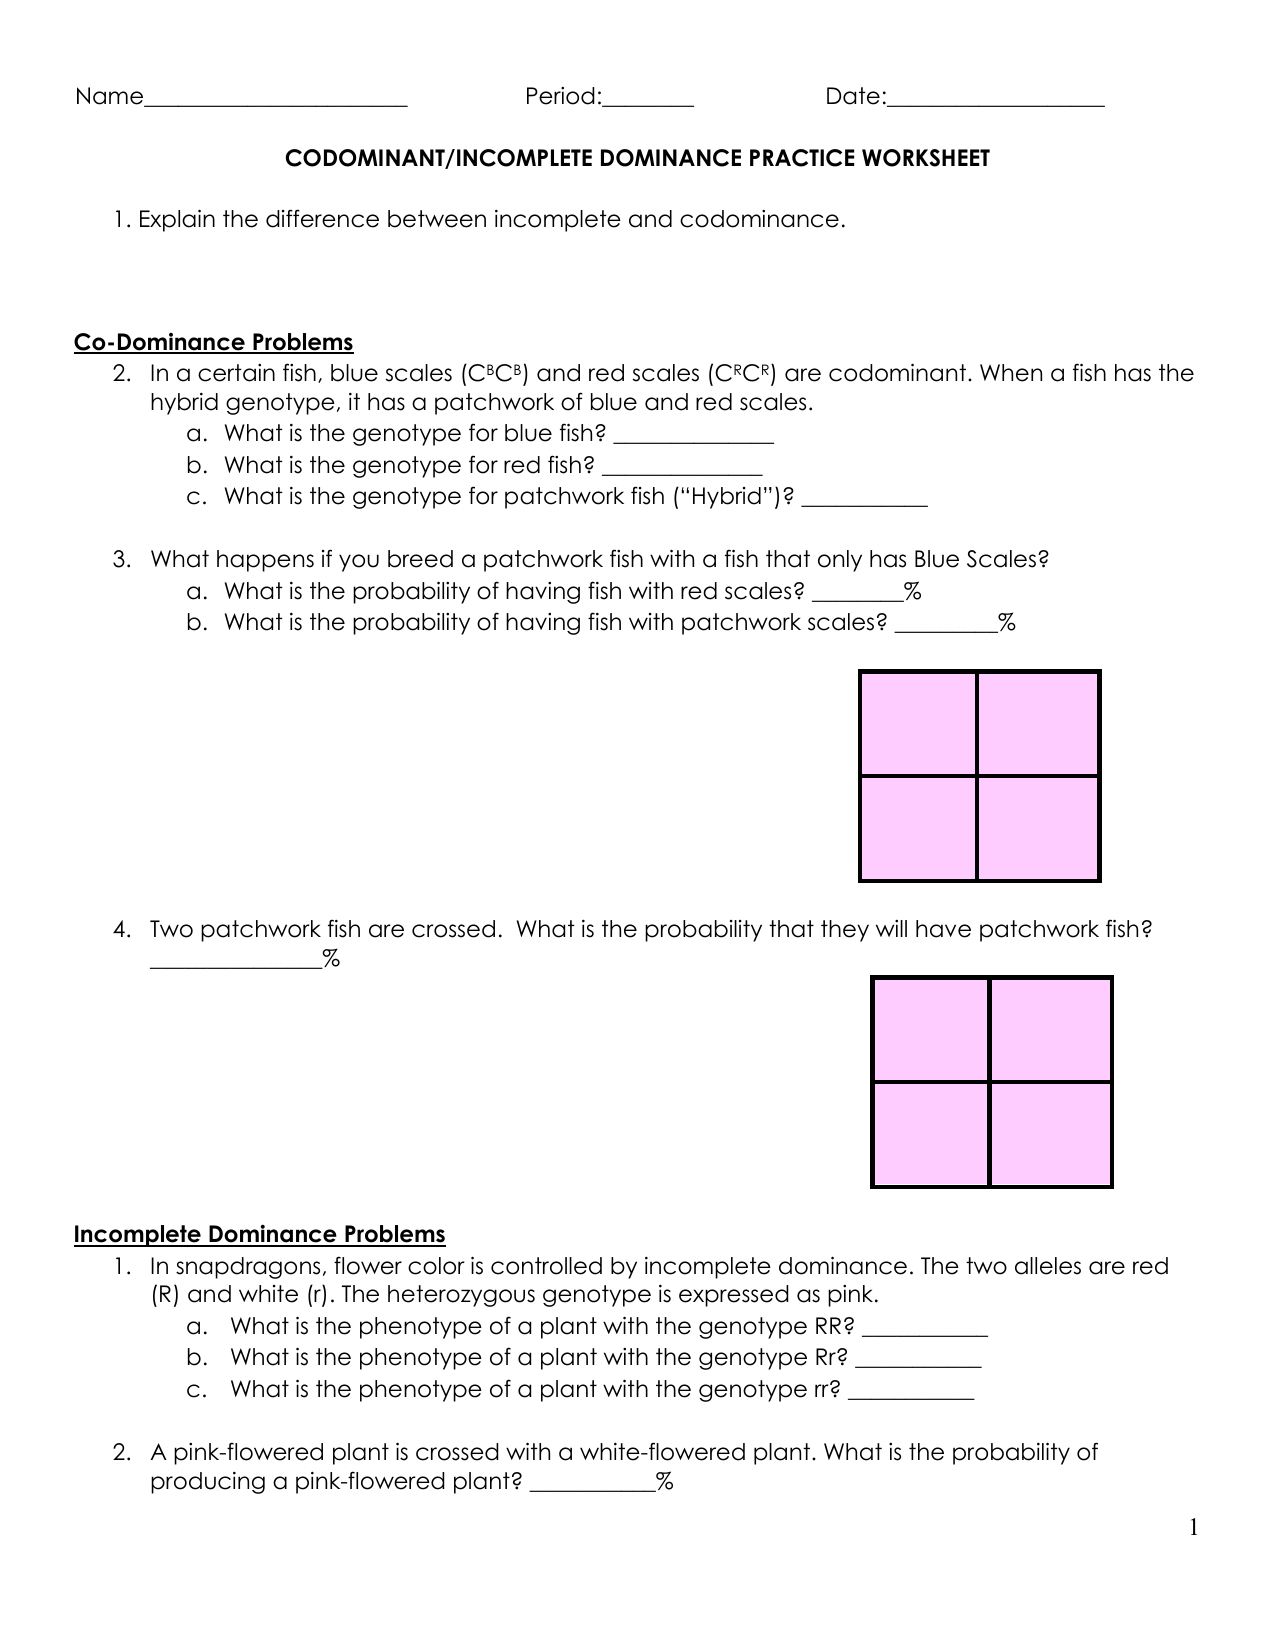 Codominant Incomplete Dominance Practice Worksheet Answer Key 2 Islero Guide Answer For Assignment